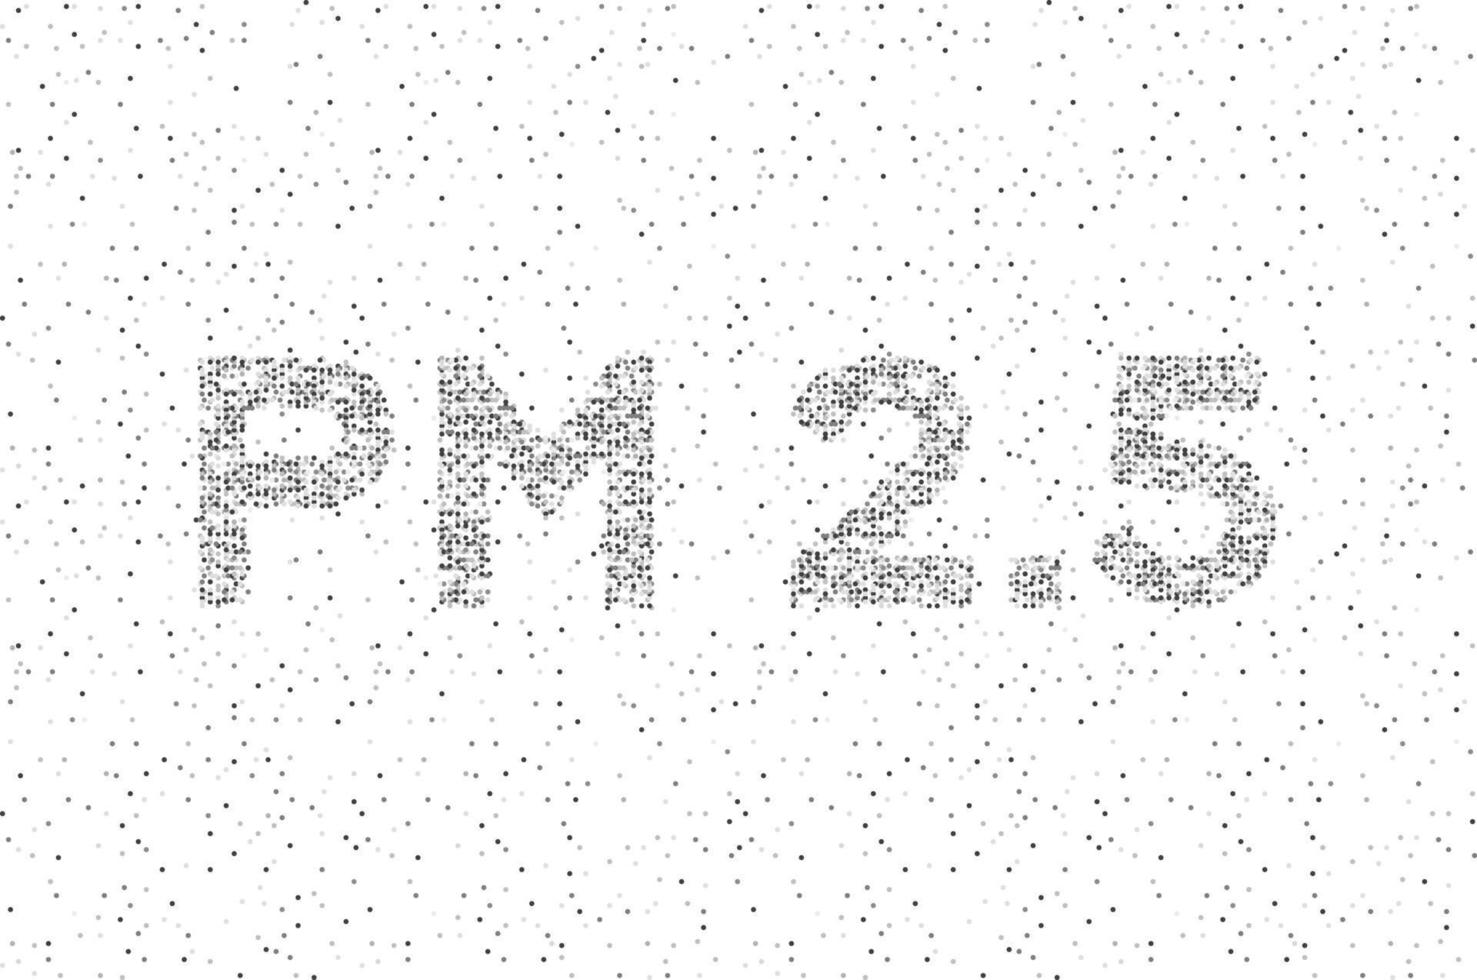 PM 2.5 text Abstract Geometric Circle dot pixel pattern, Pollution concept design black color illustration isolated on white background with copy space, vector eps 10